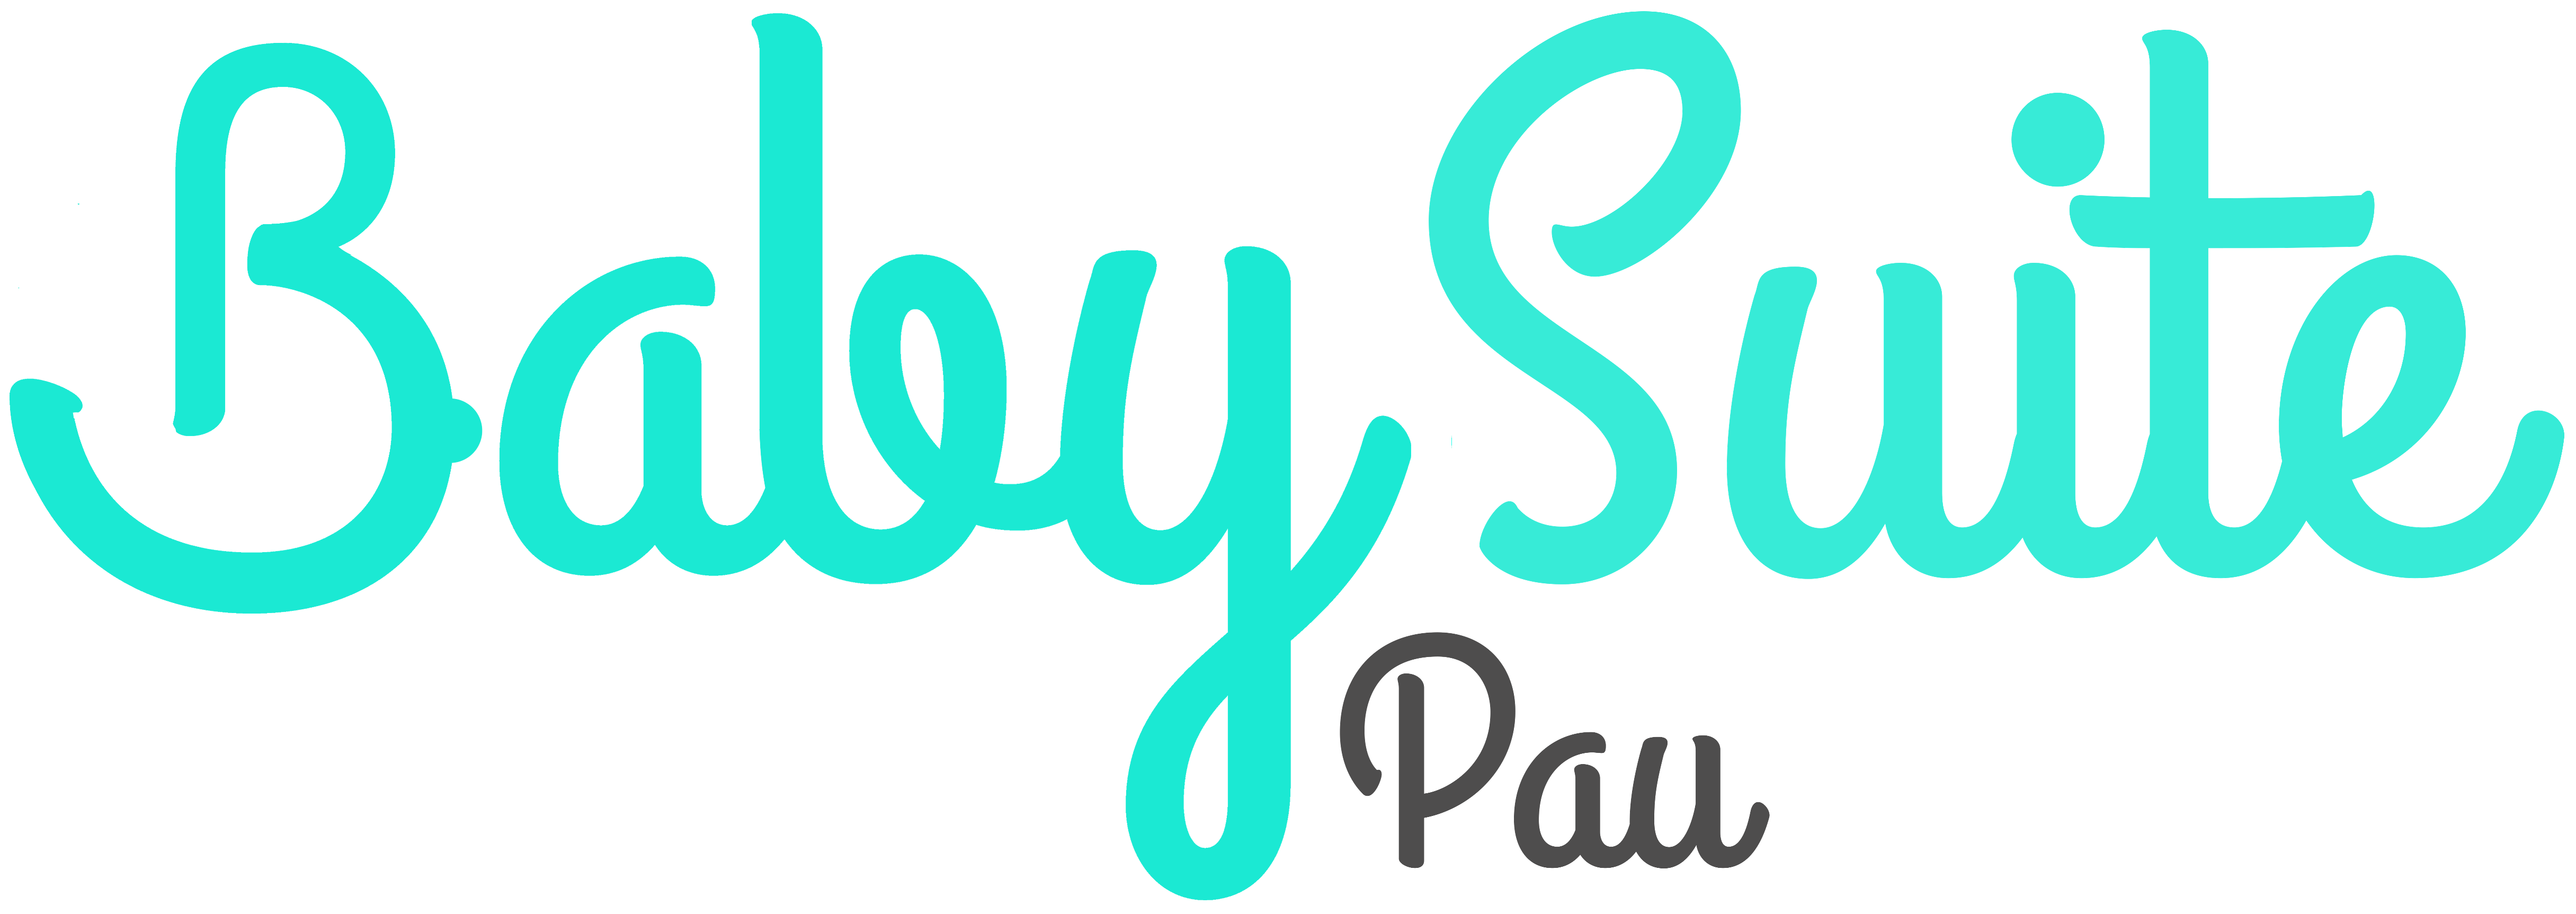 Baby Suite by Pau